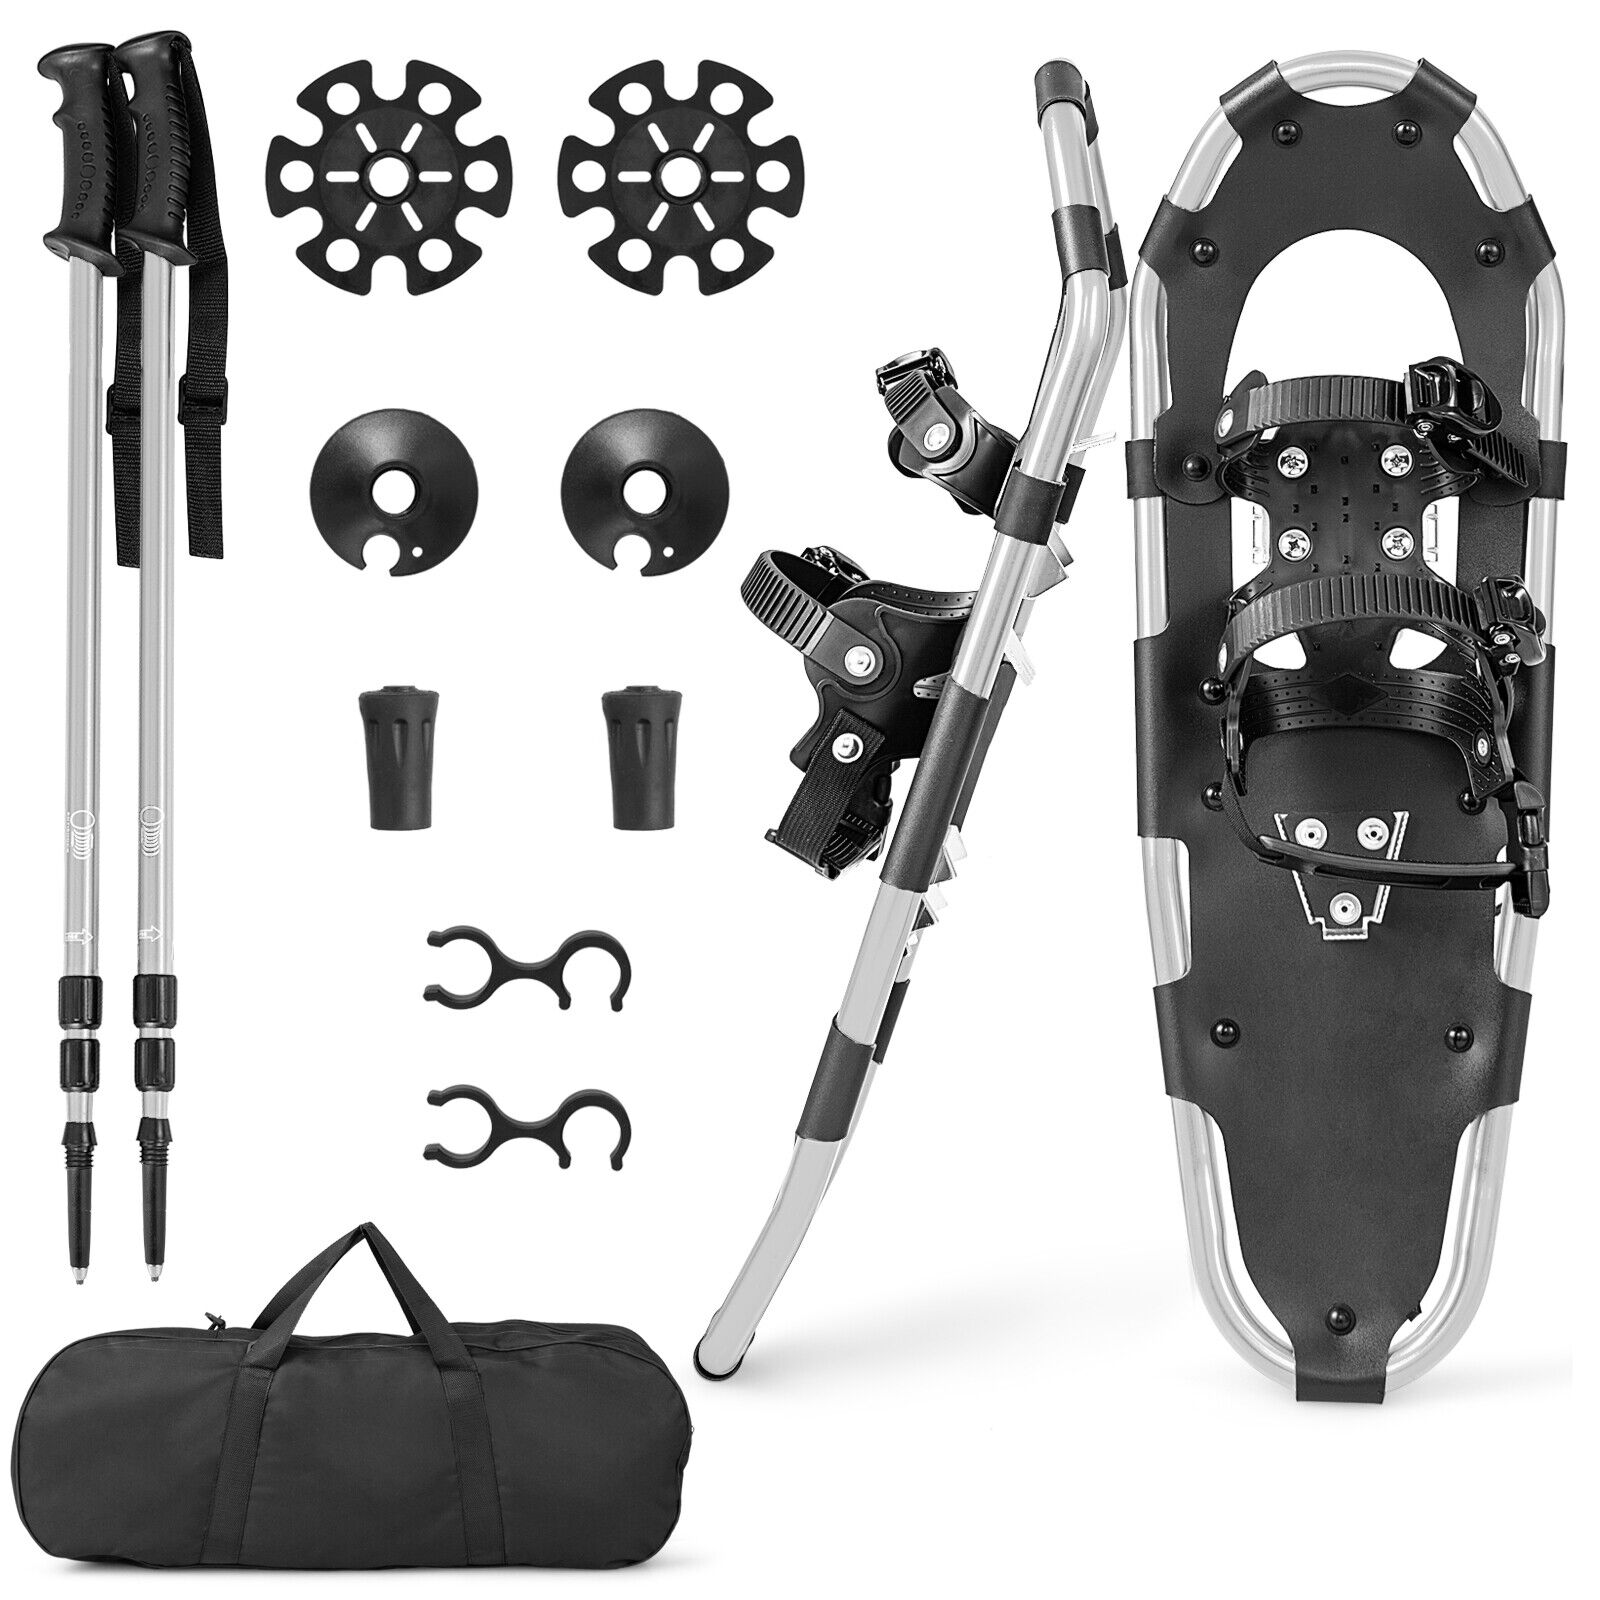 4 in 1 Lightweight Terrain Snowshoes for Adults Youth Kids 25 Inches:63 cm x 21 cm